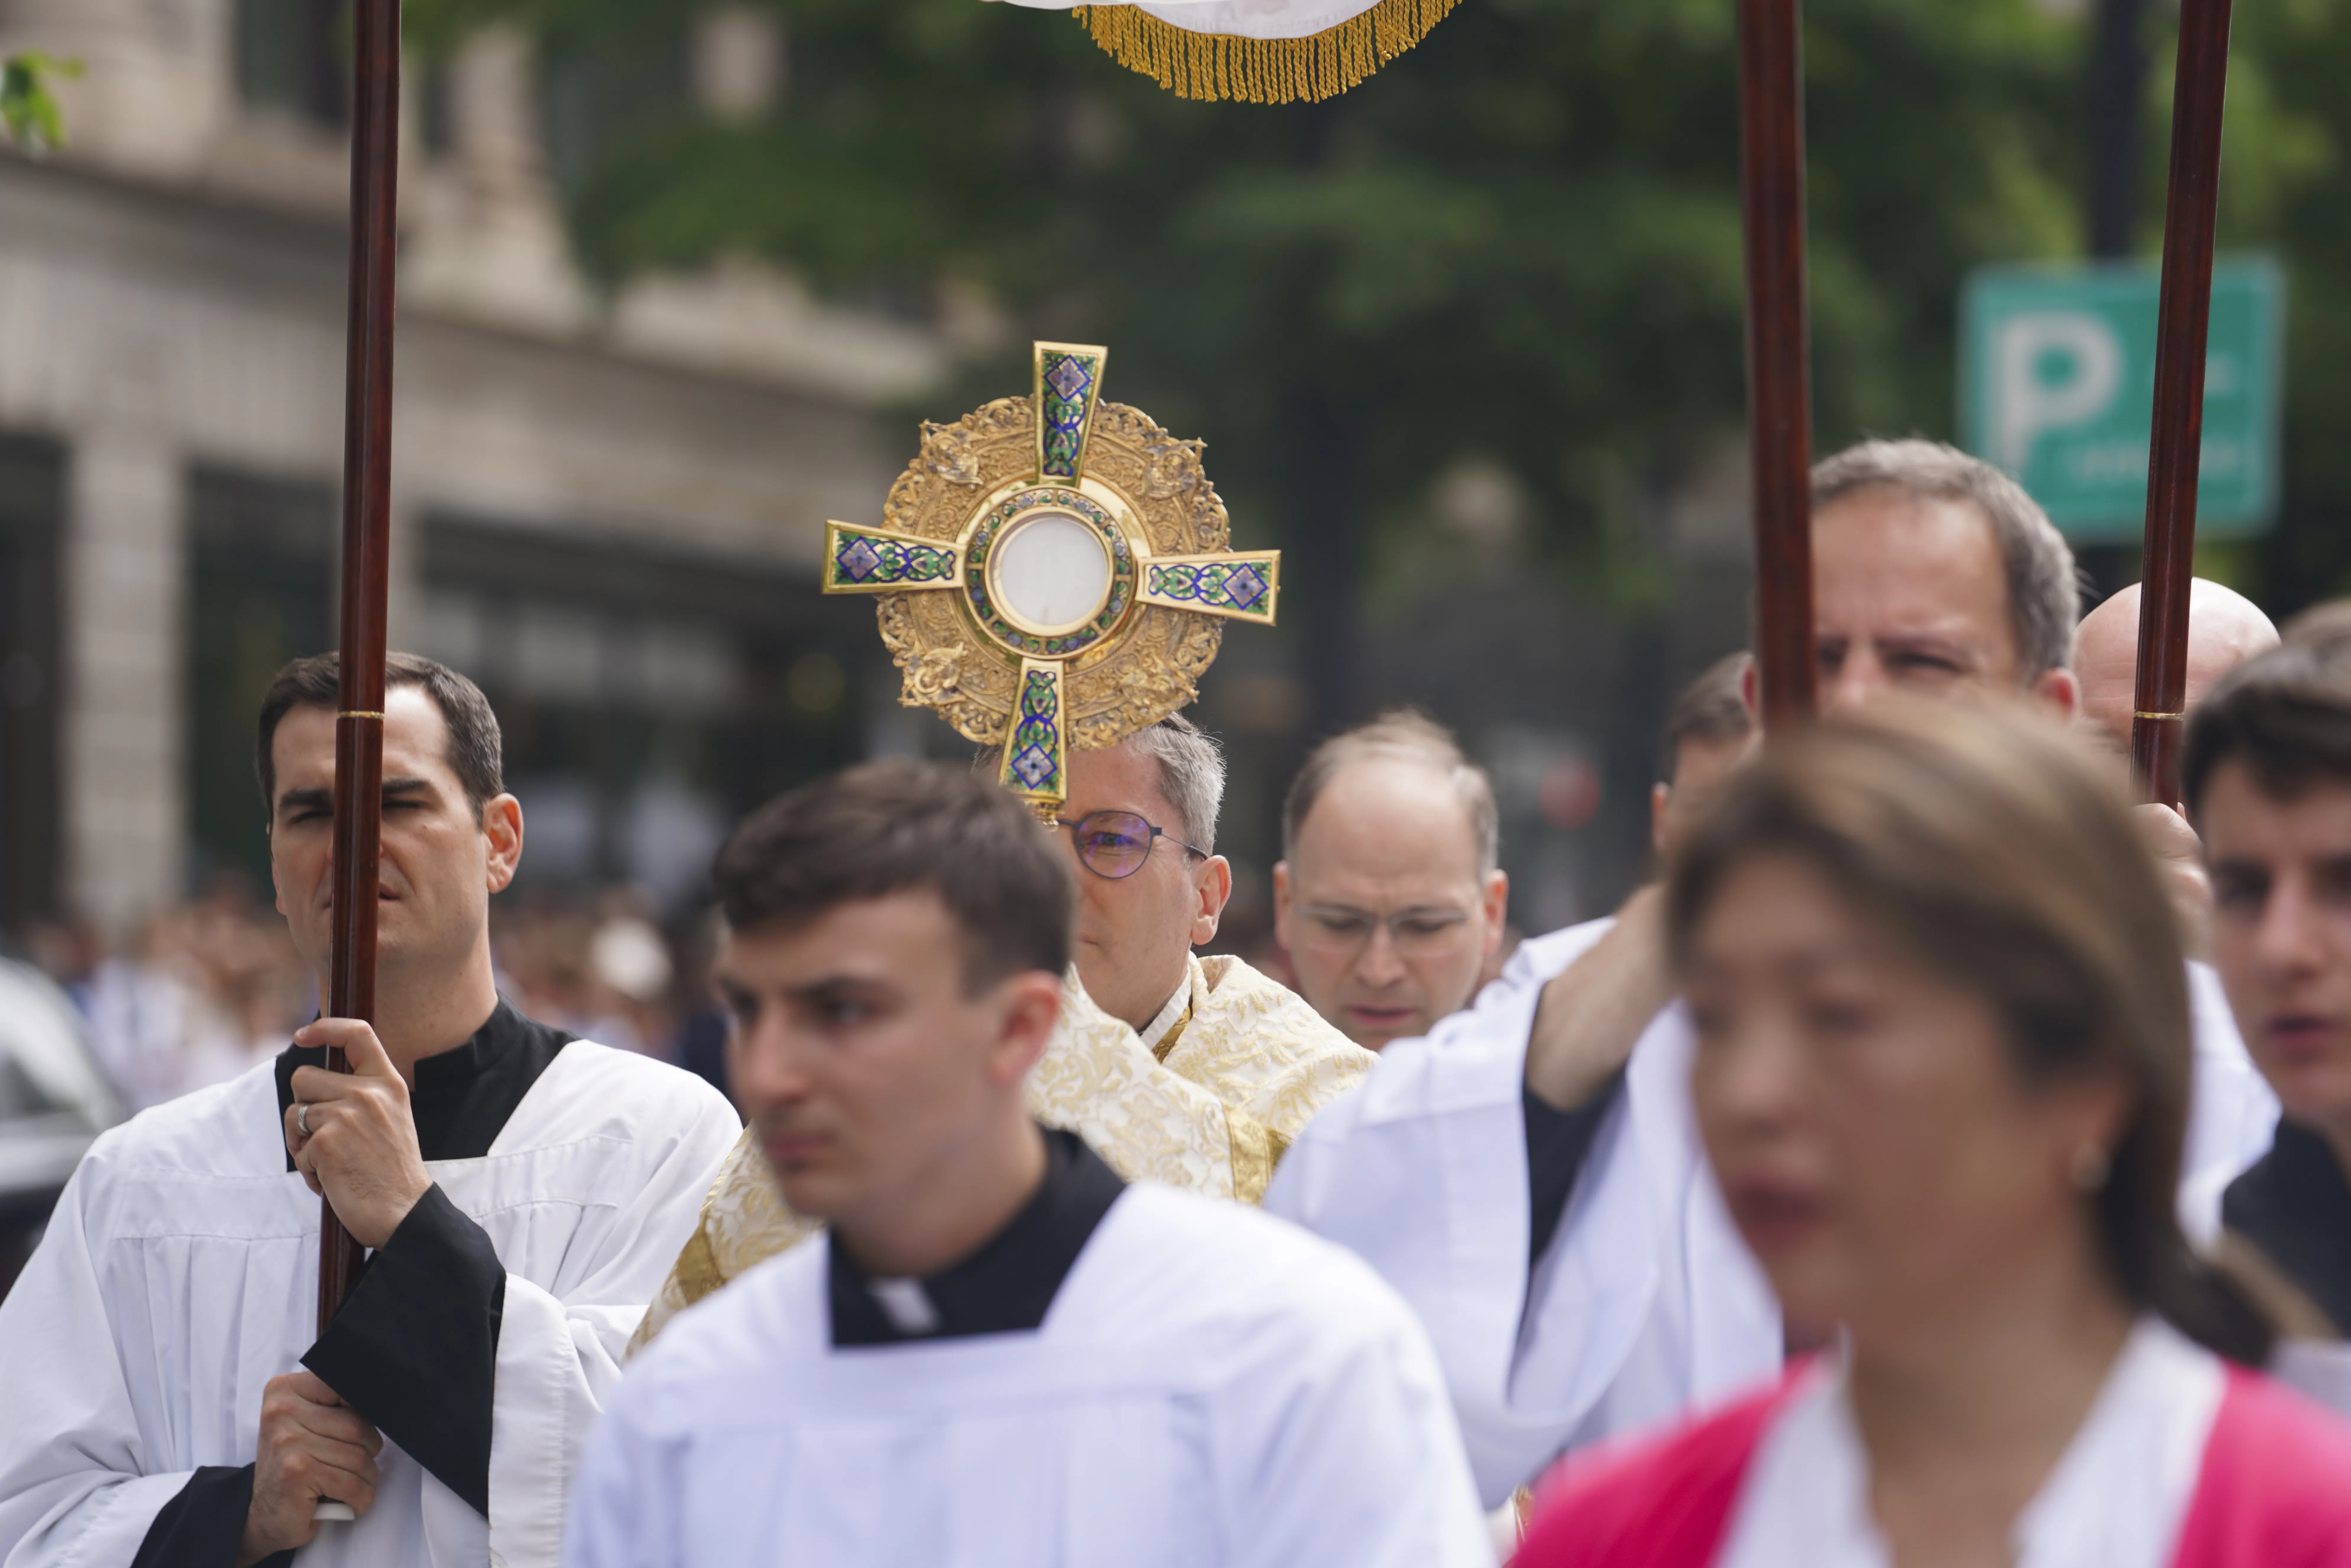 A few hundred Catholics marched through the streets of Washington, D.C., to publicly pray and adore the body of Christ during a eucharistic procession on Saturday, May 20, 2023.?w=200&h=150